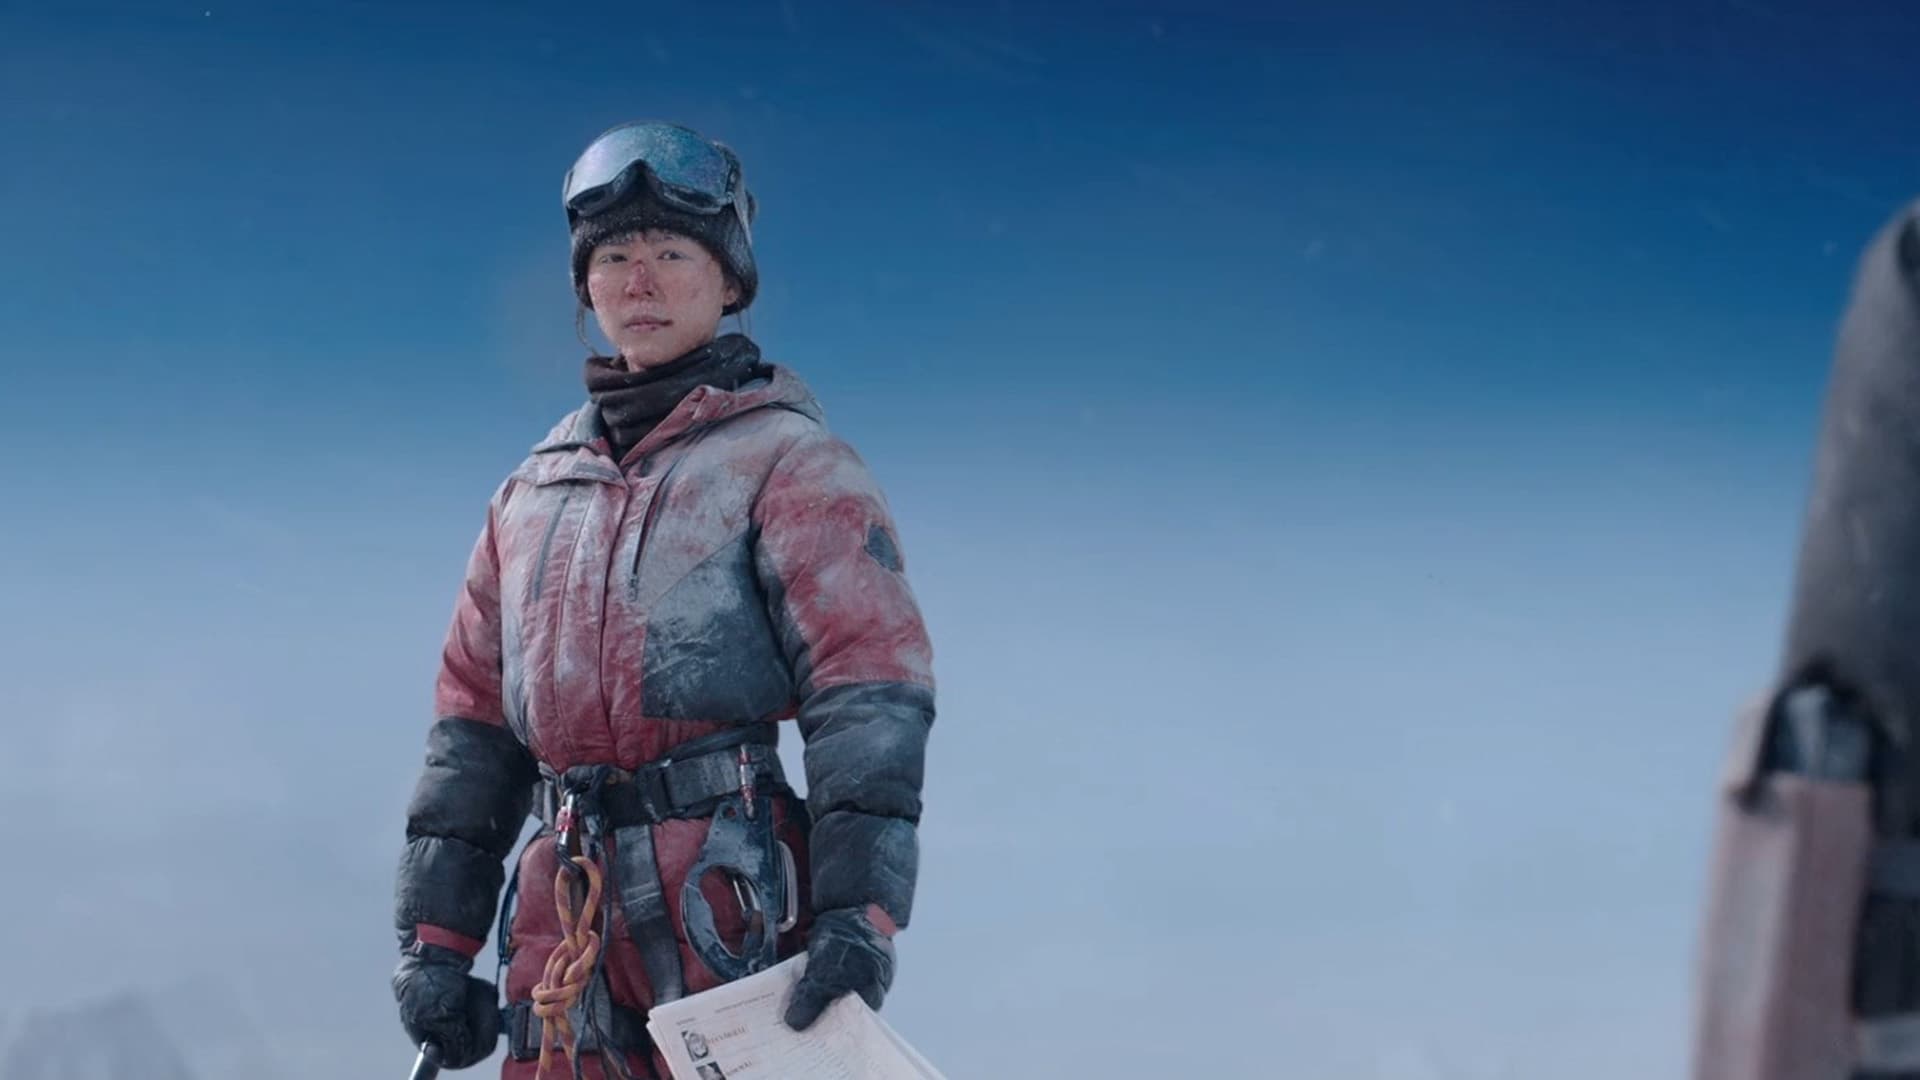 Wings Over Everest 2019 123movies